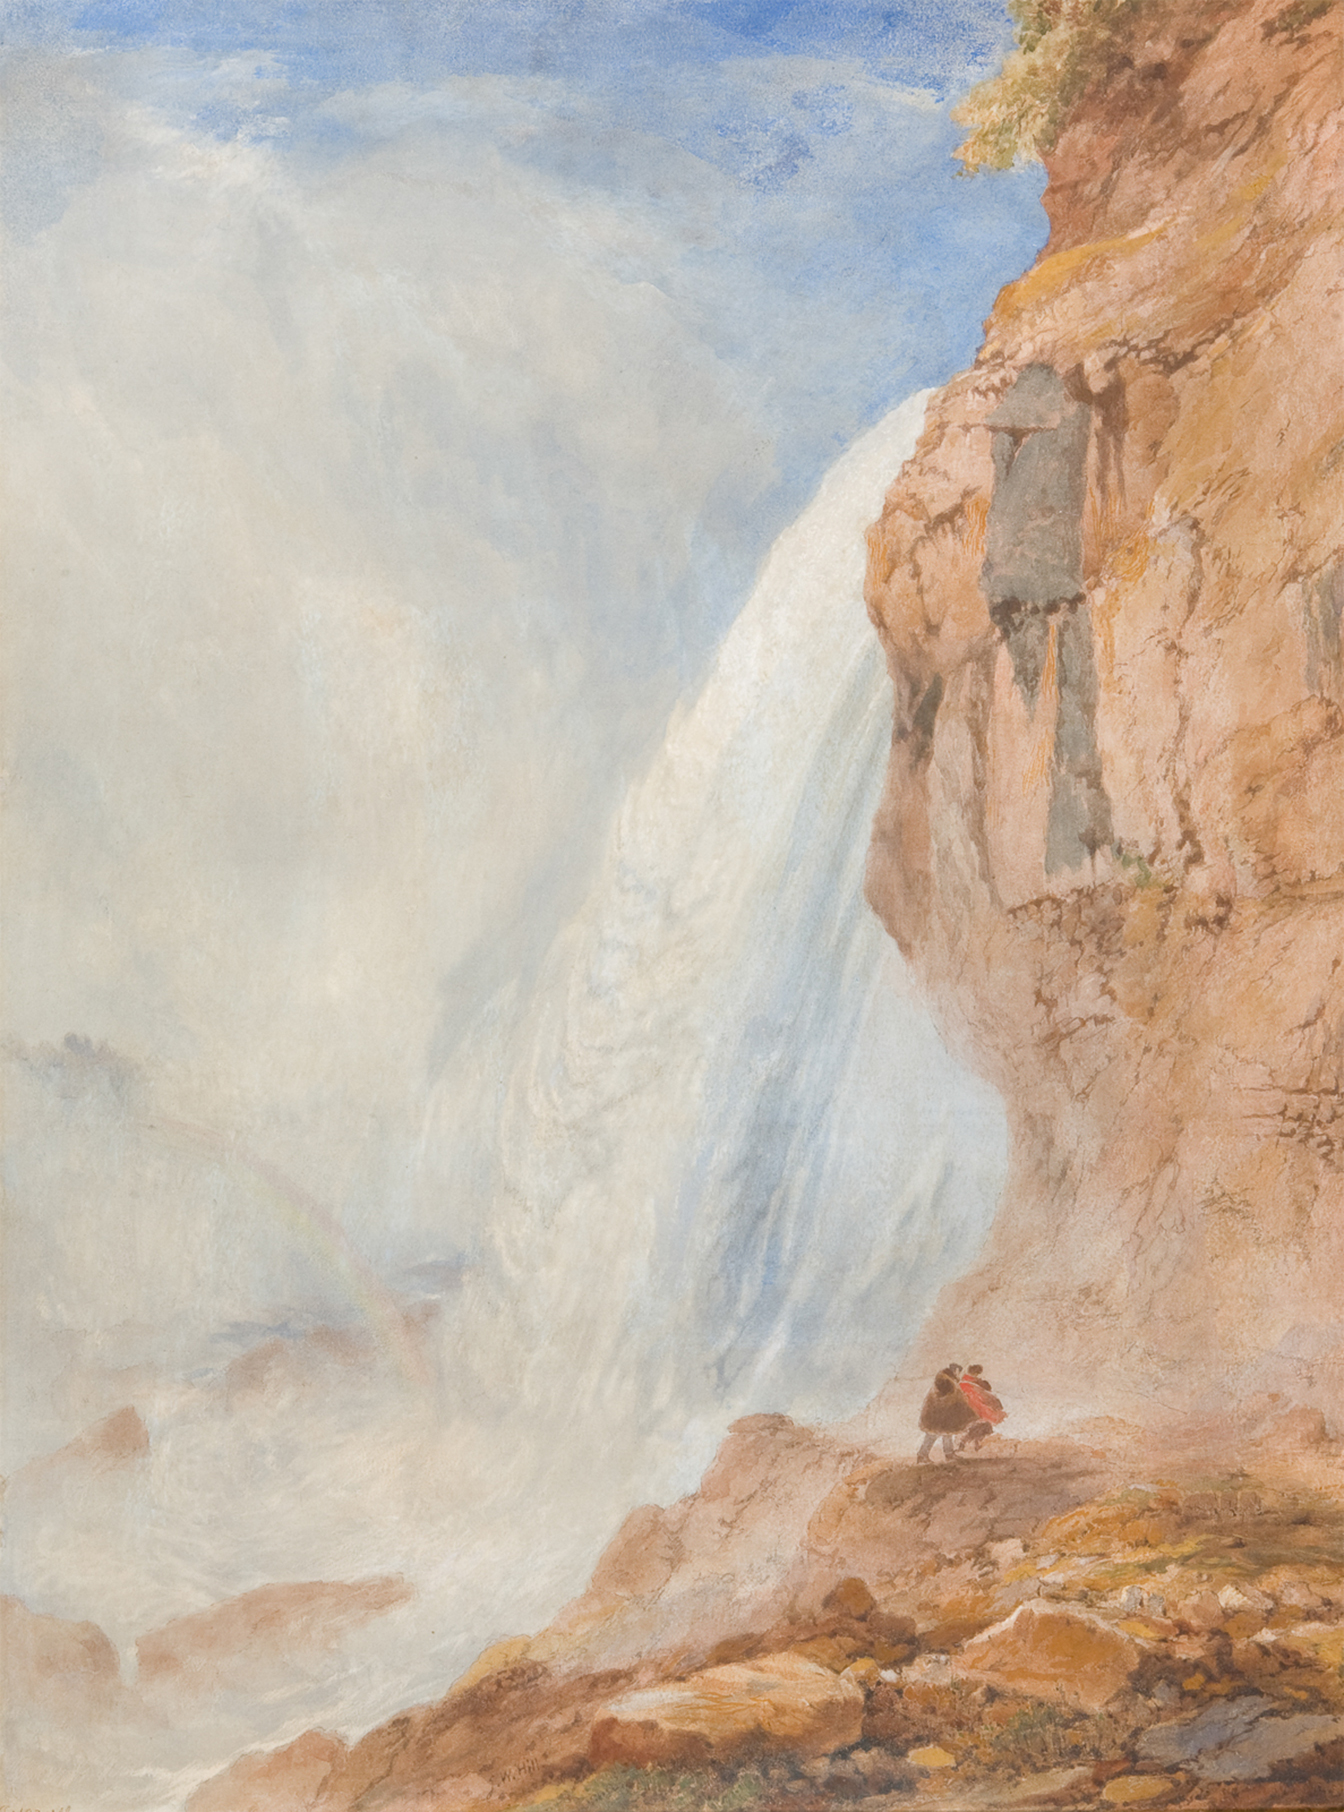 John William Hill, Under the Falls, Niagara, c. 1870, watercolor on paper, 29 x 21½ inches. Palmer Museum of Art, The John Driscoll American Drawings Collection, 2018.153